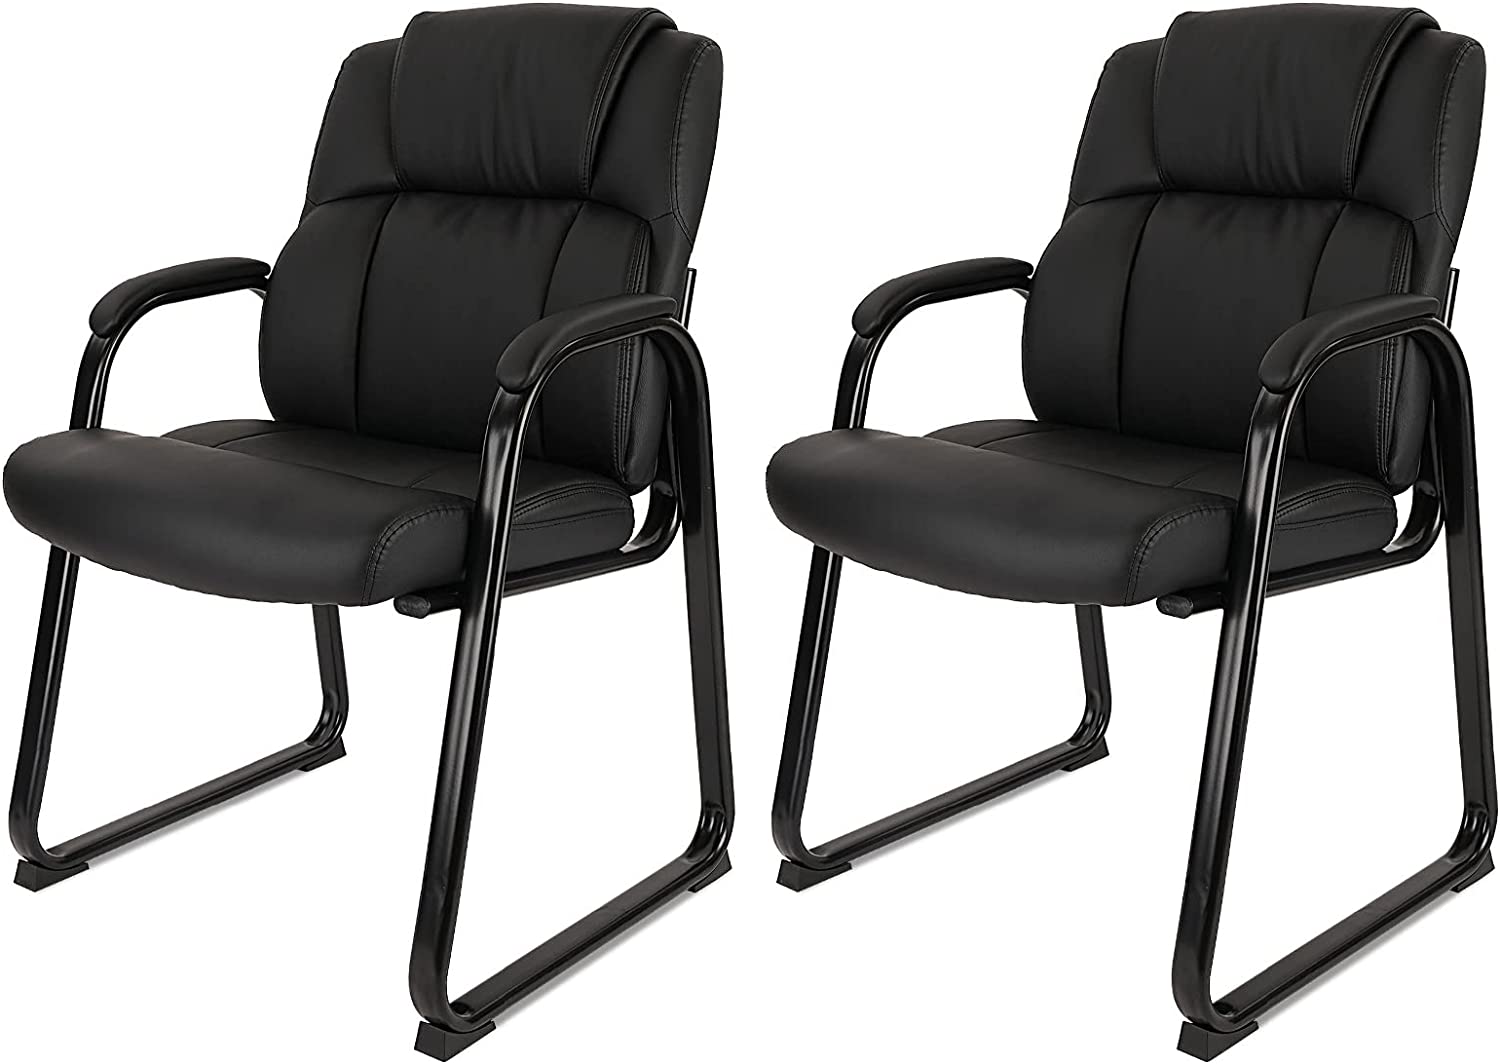 CLATINA Leather Guest Chair with Padded Arm Rest and Sled Base Meeting Conference and Waiting Room Side Office Home BIFMA Certified Black 2 Pack - image 1 of 6